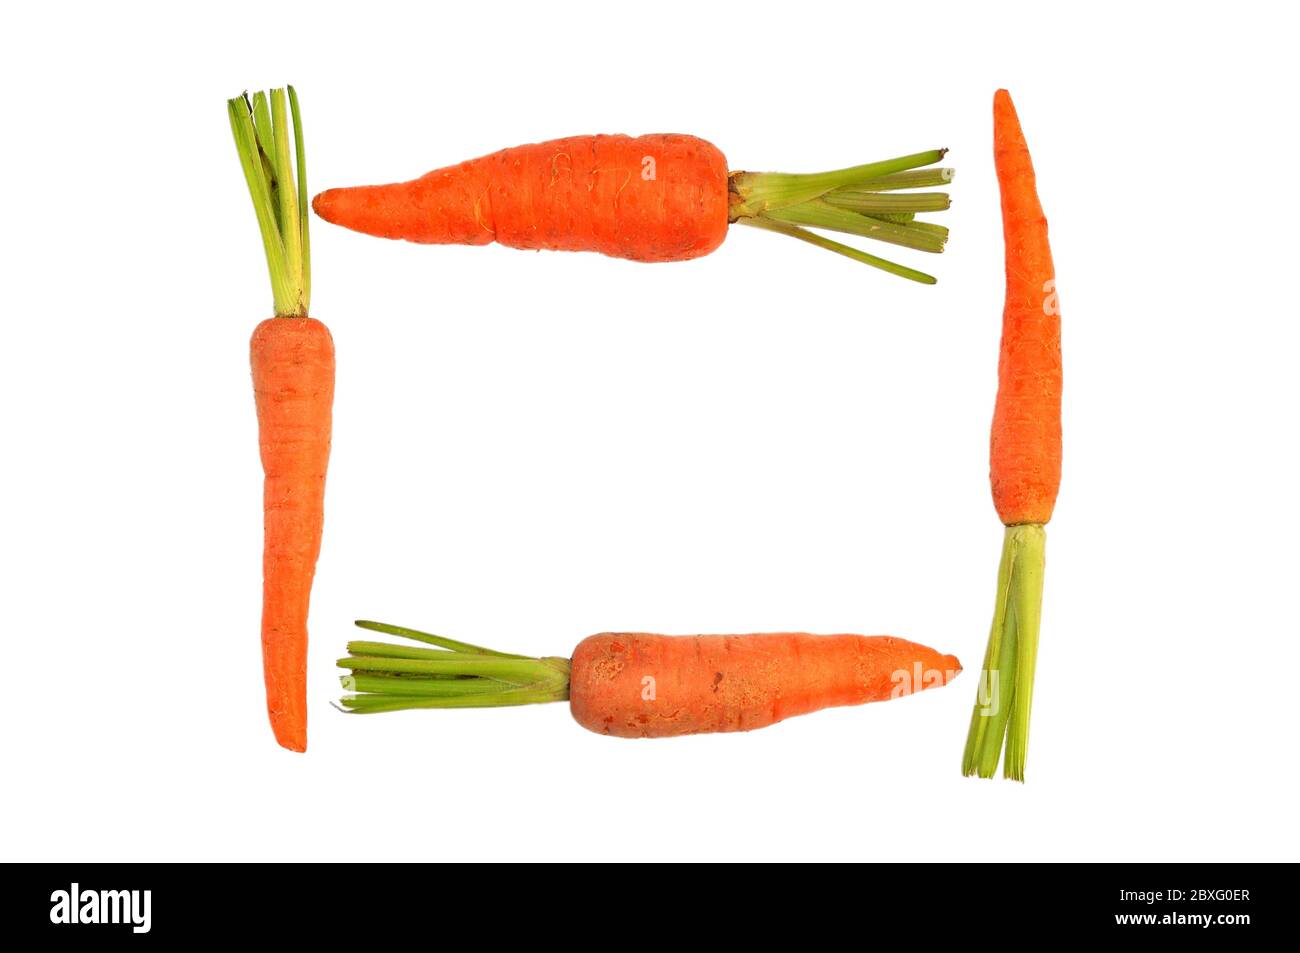 The immature roots of the carrot plant on white background Stock Photo